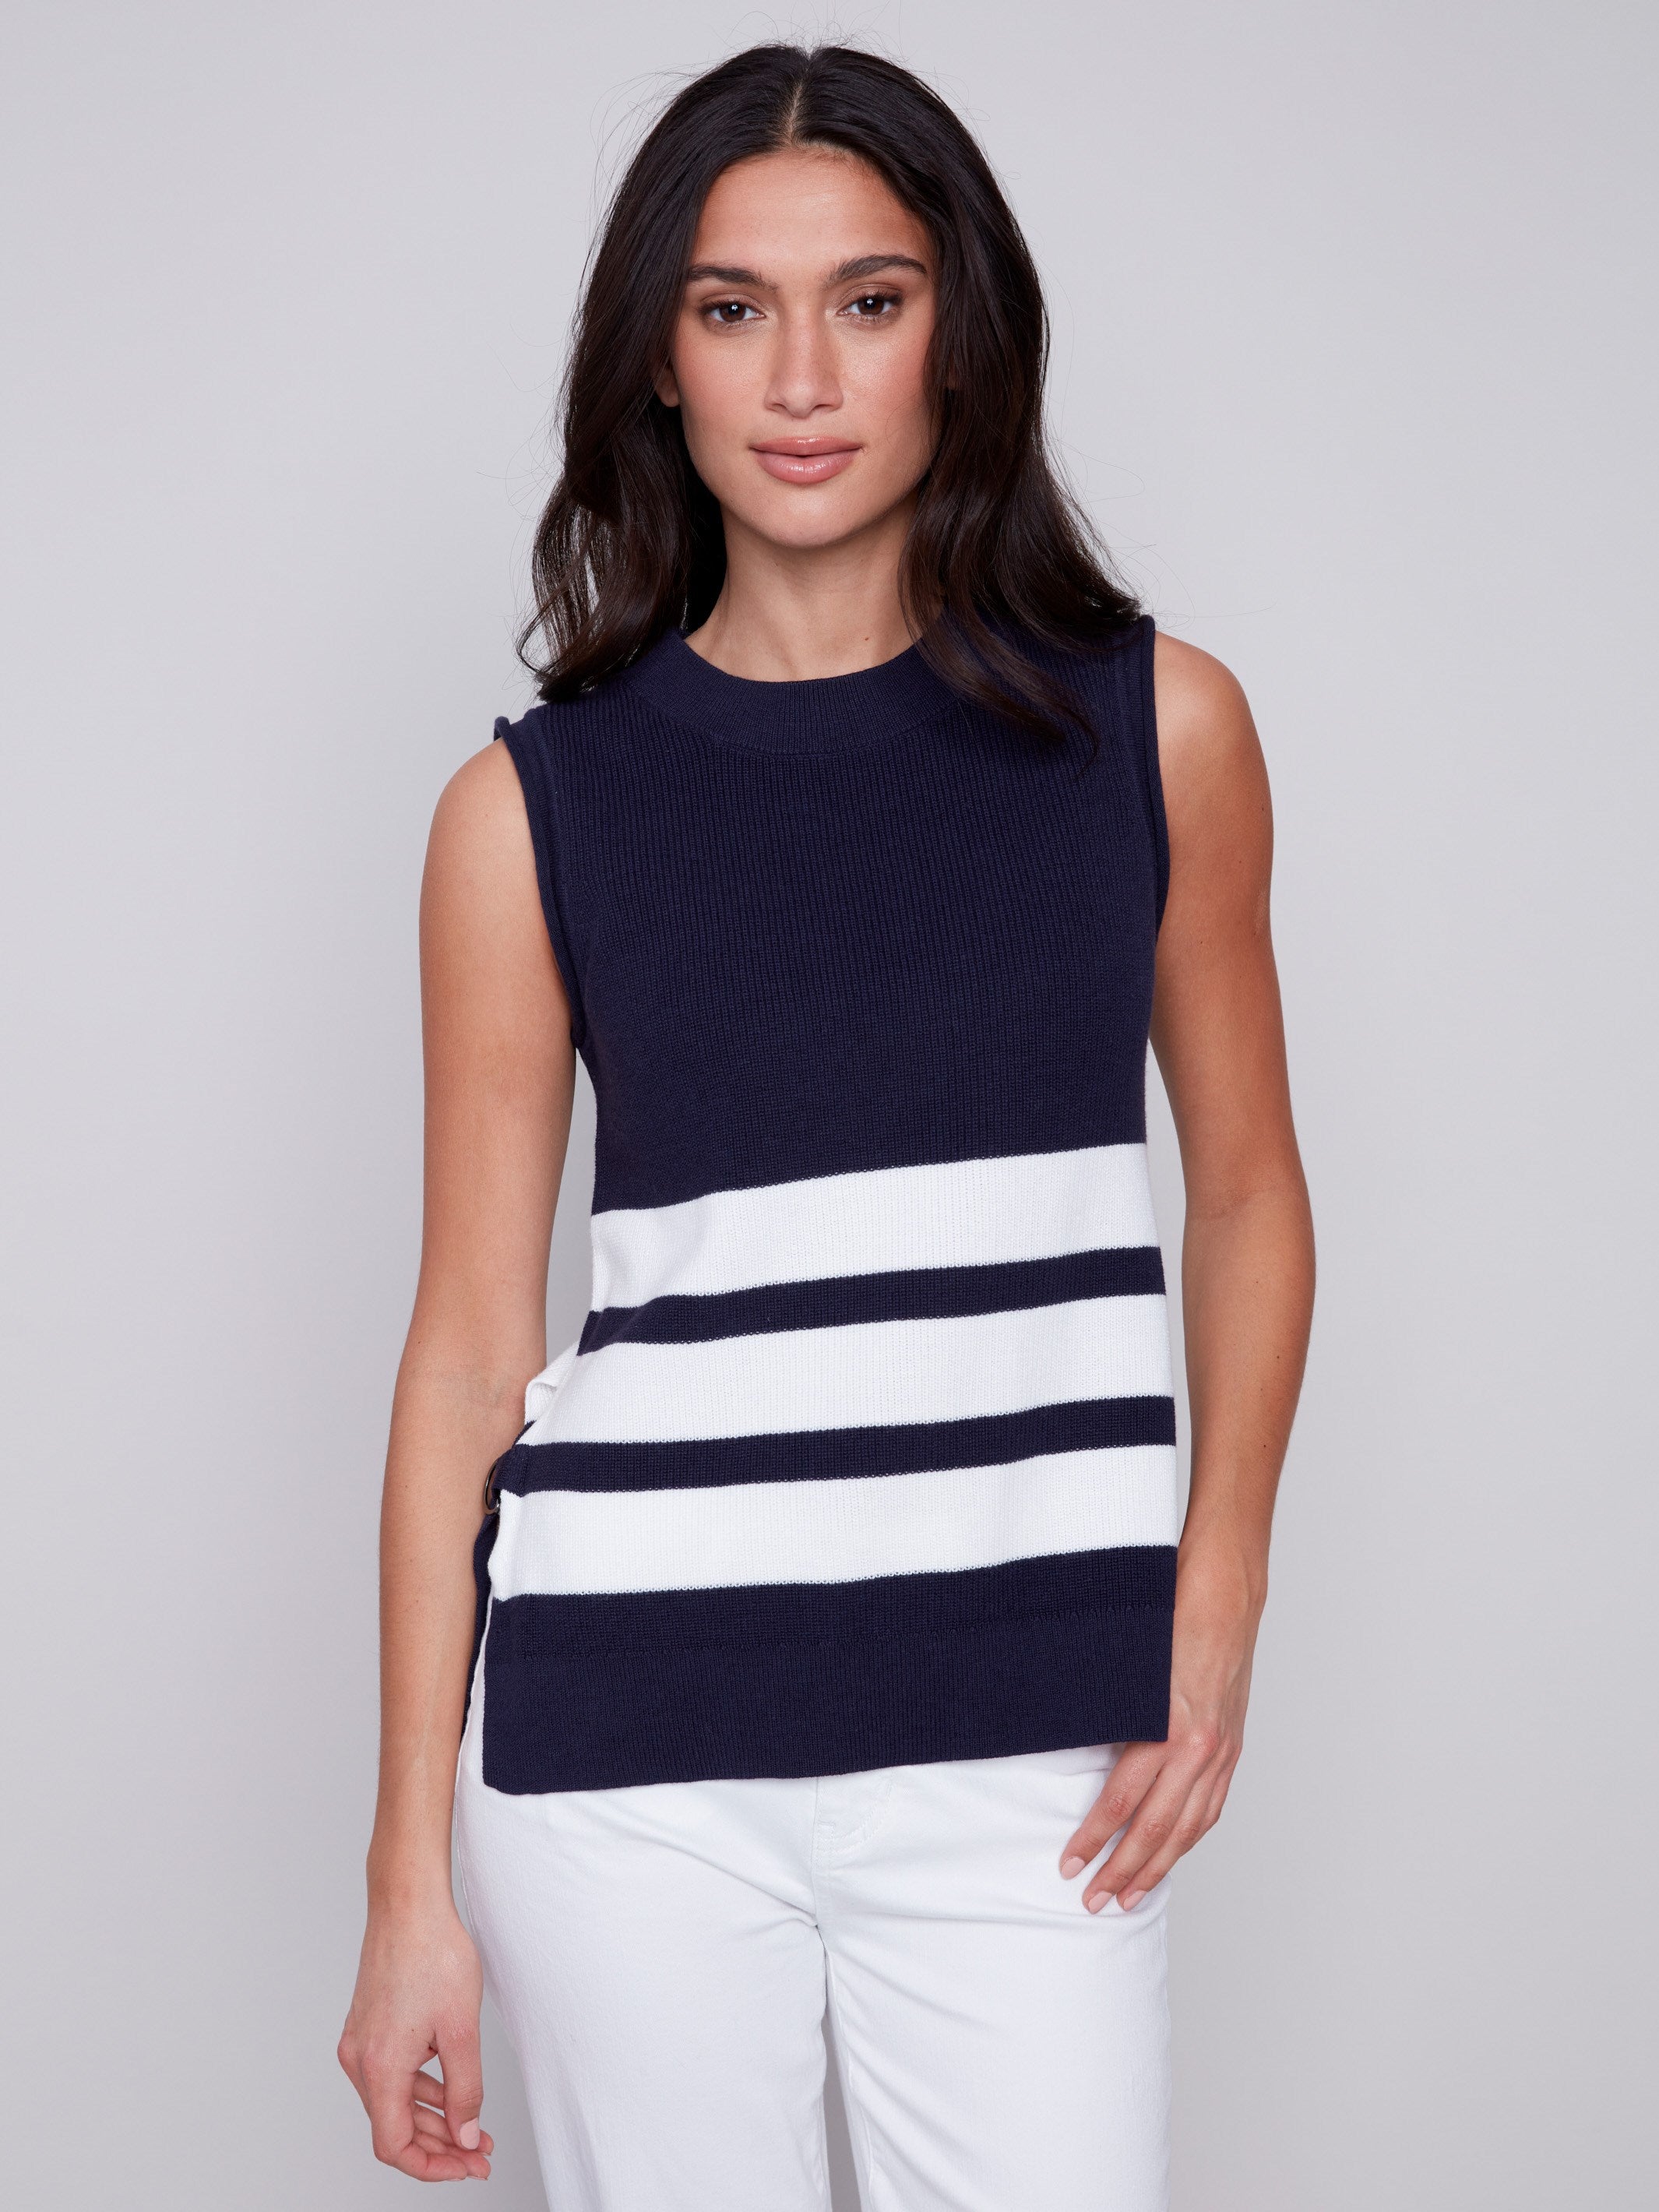 Striped Sweater Vest - Navy - Charlie B Collection Canada - Image 1